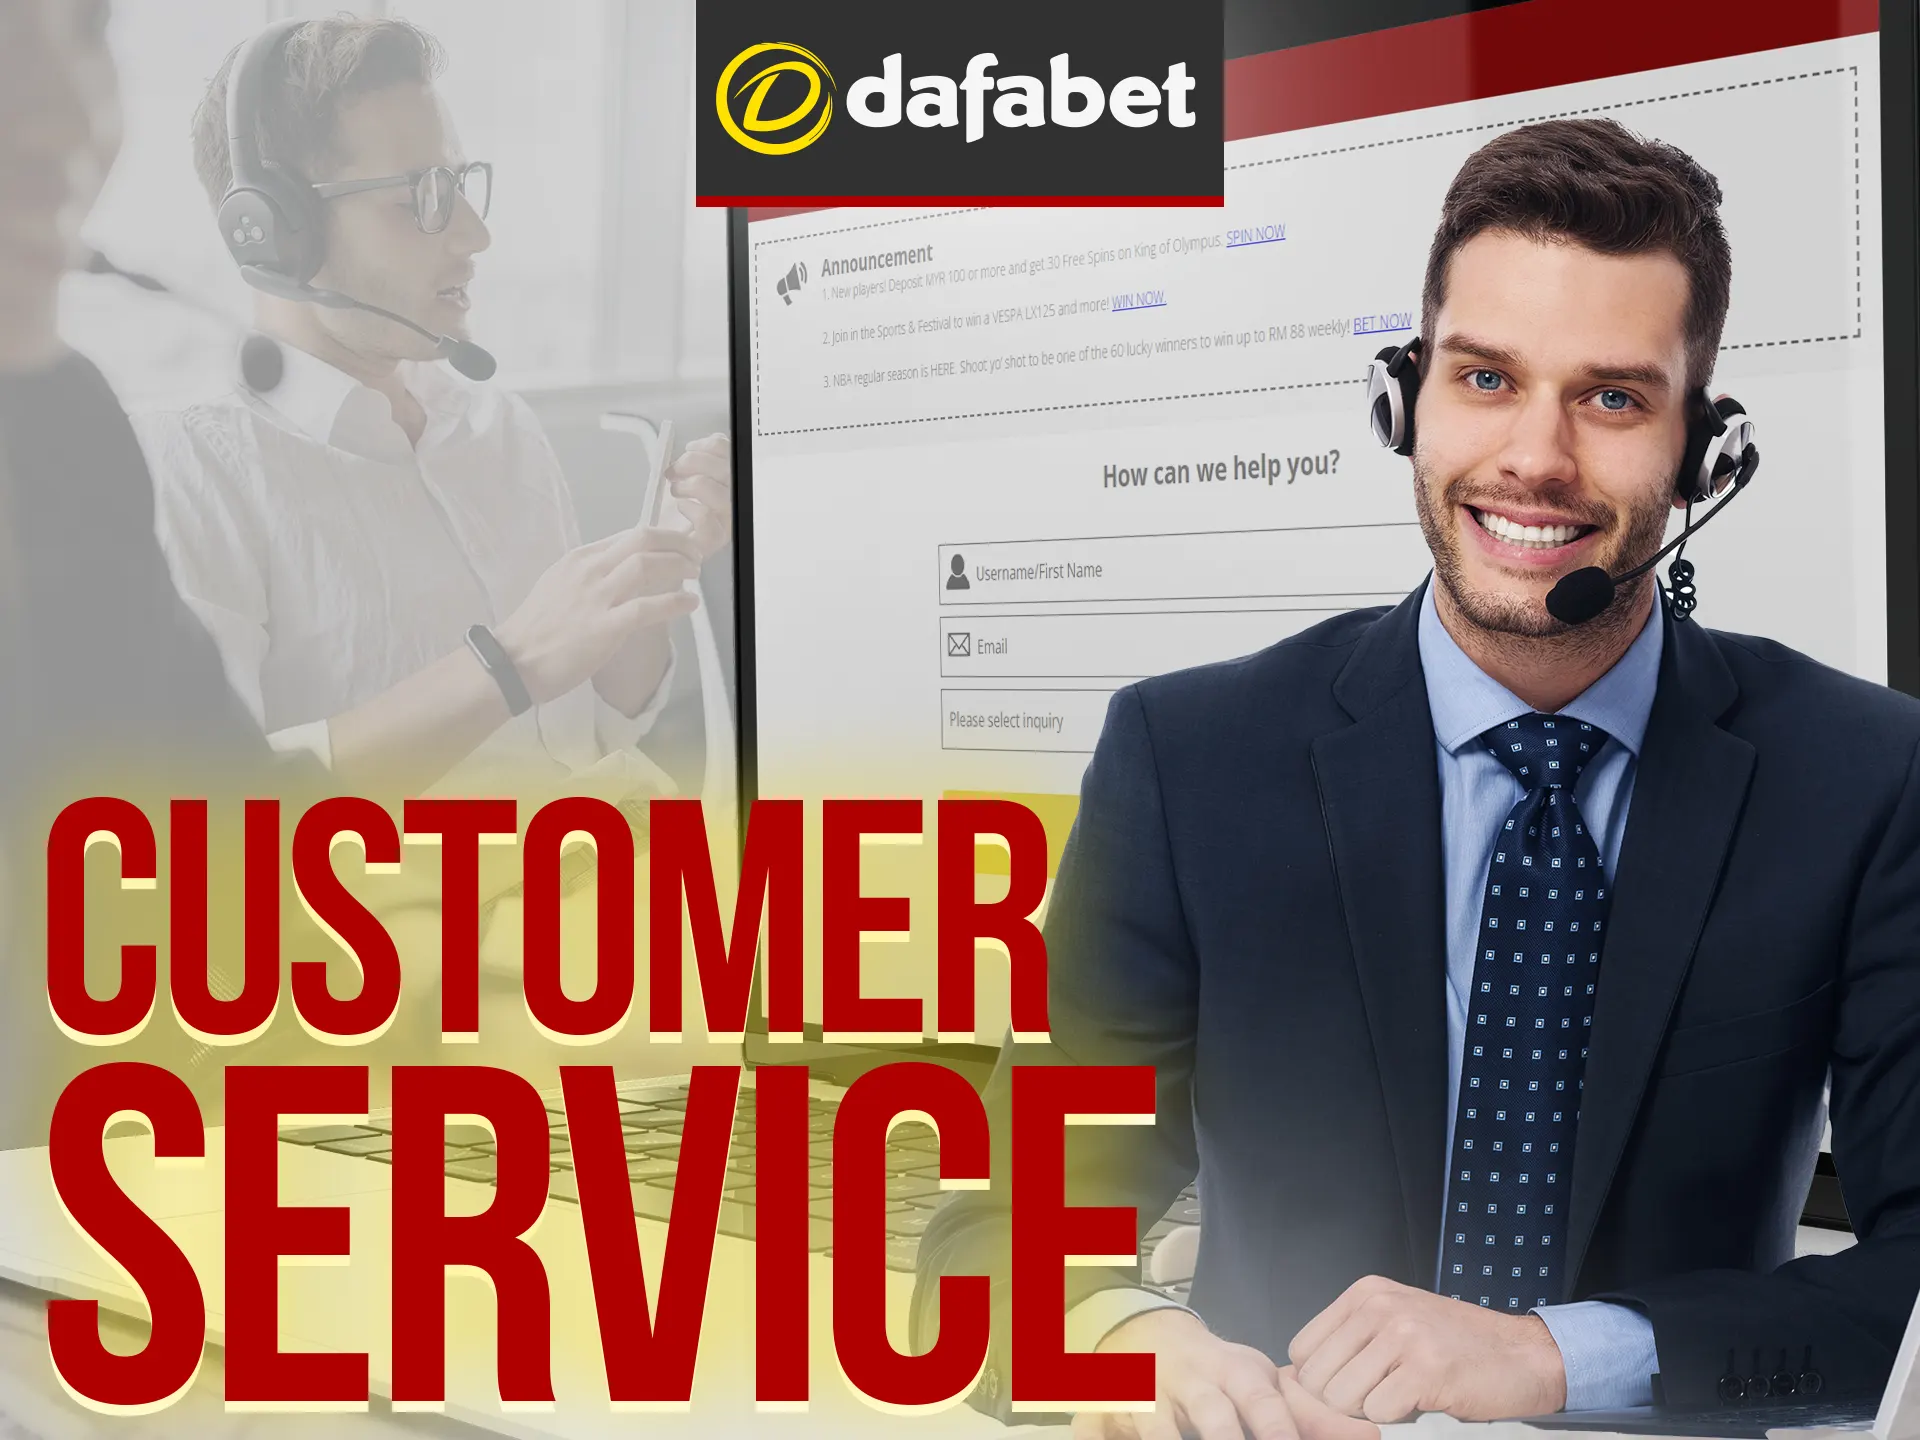 Contact with Dafabet customer service via hotline, email, or live chat for 24/7 assistance.